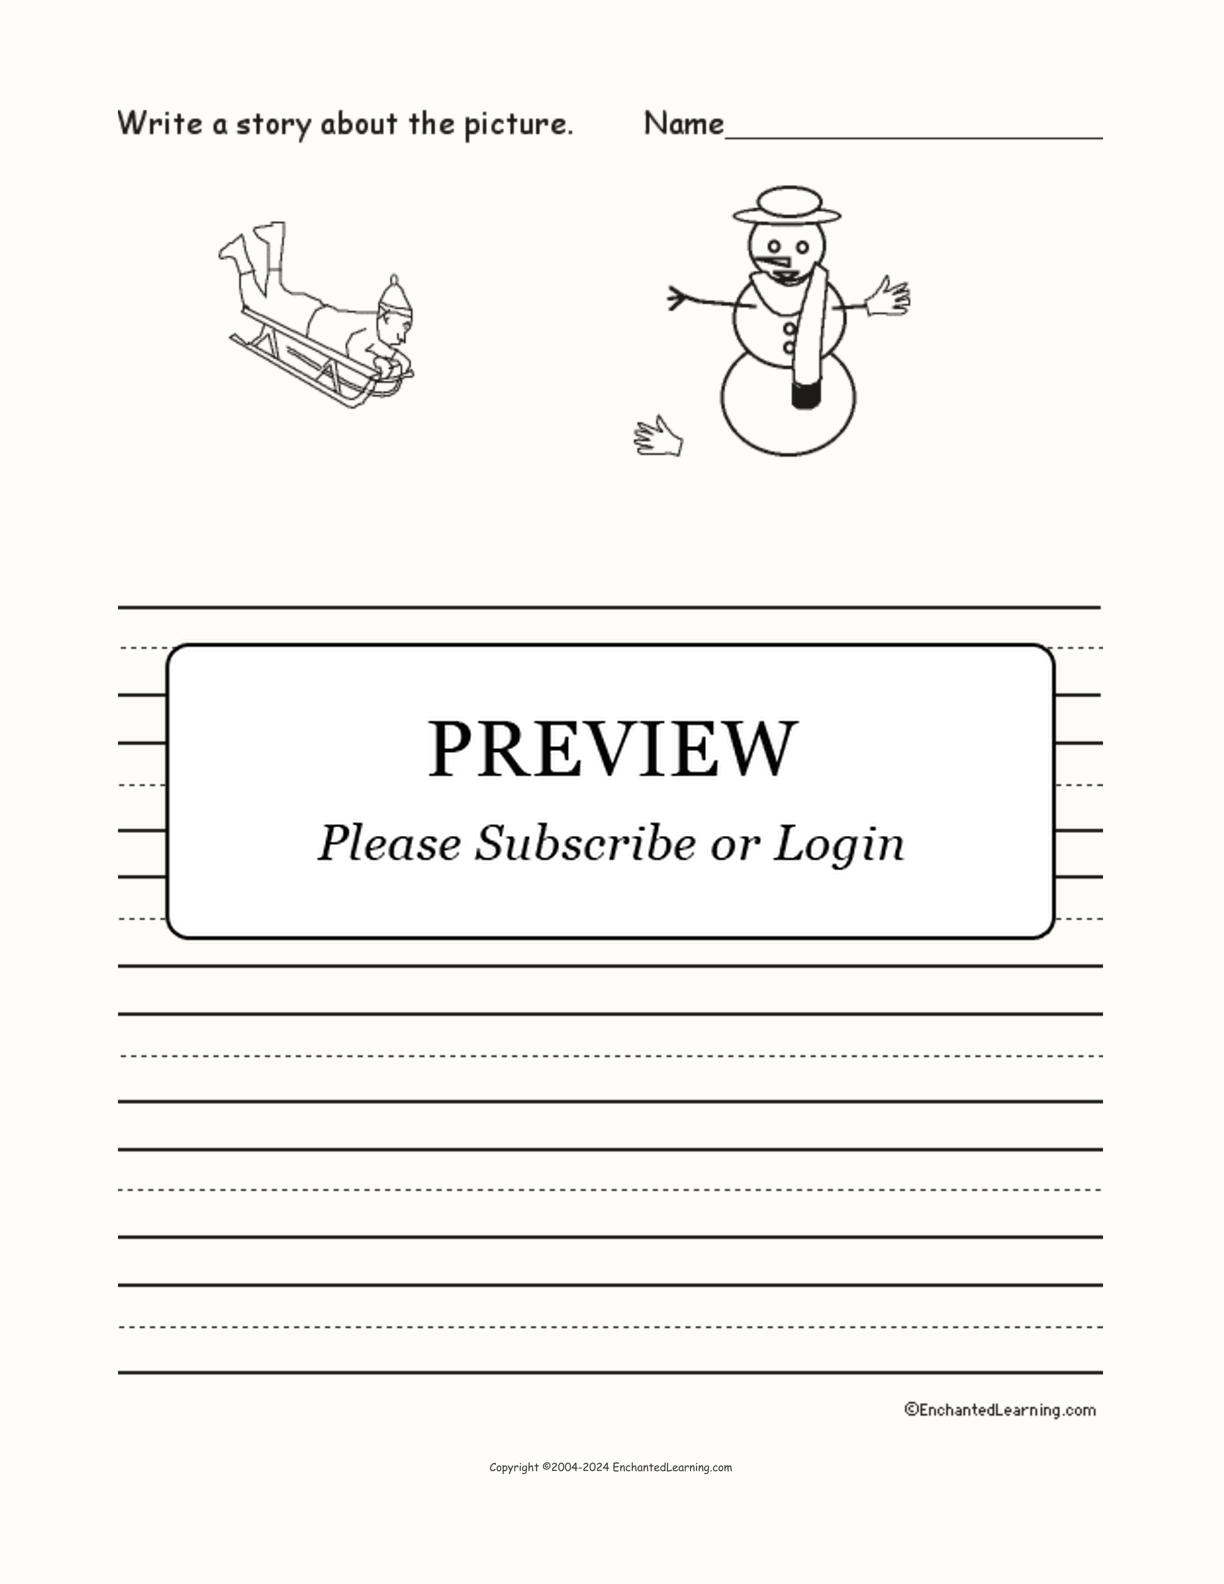 Picture Prompts - Winter interactive worksheet page 1